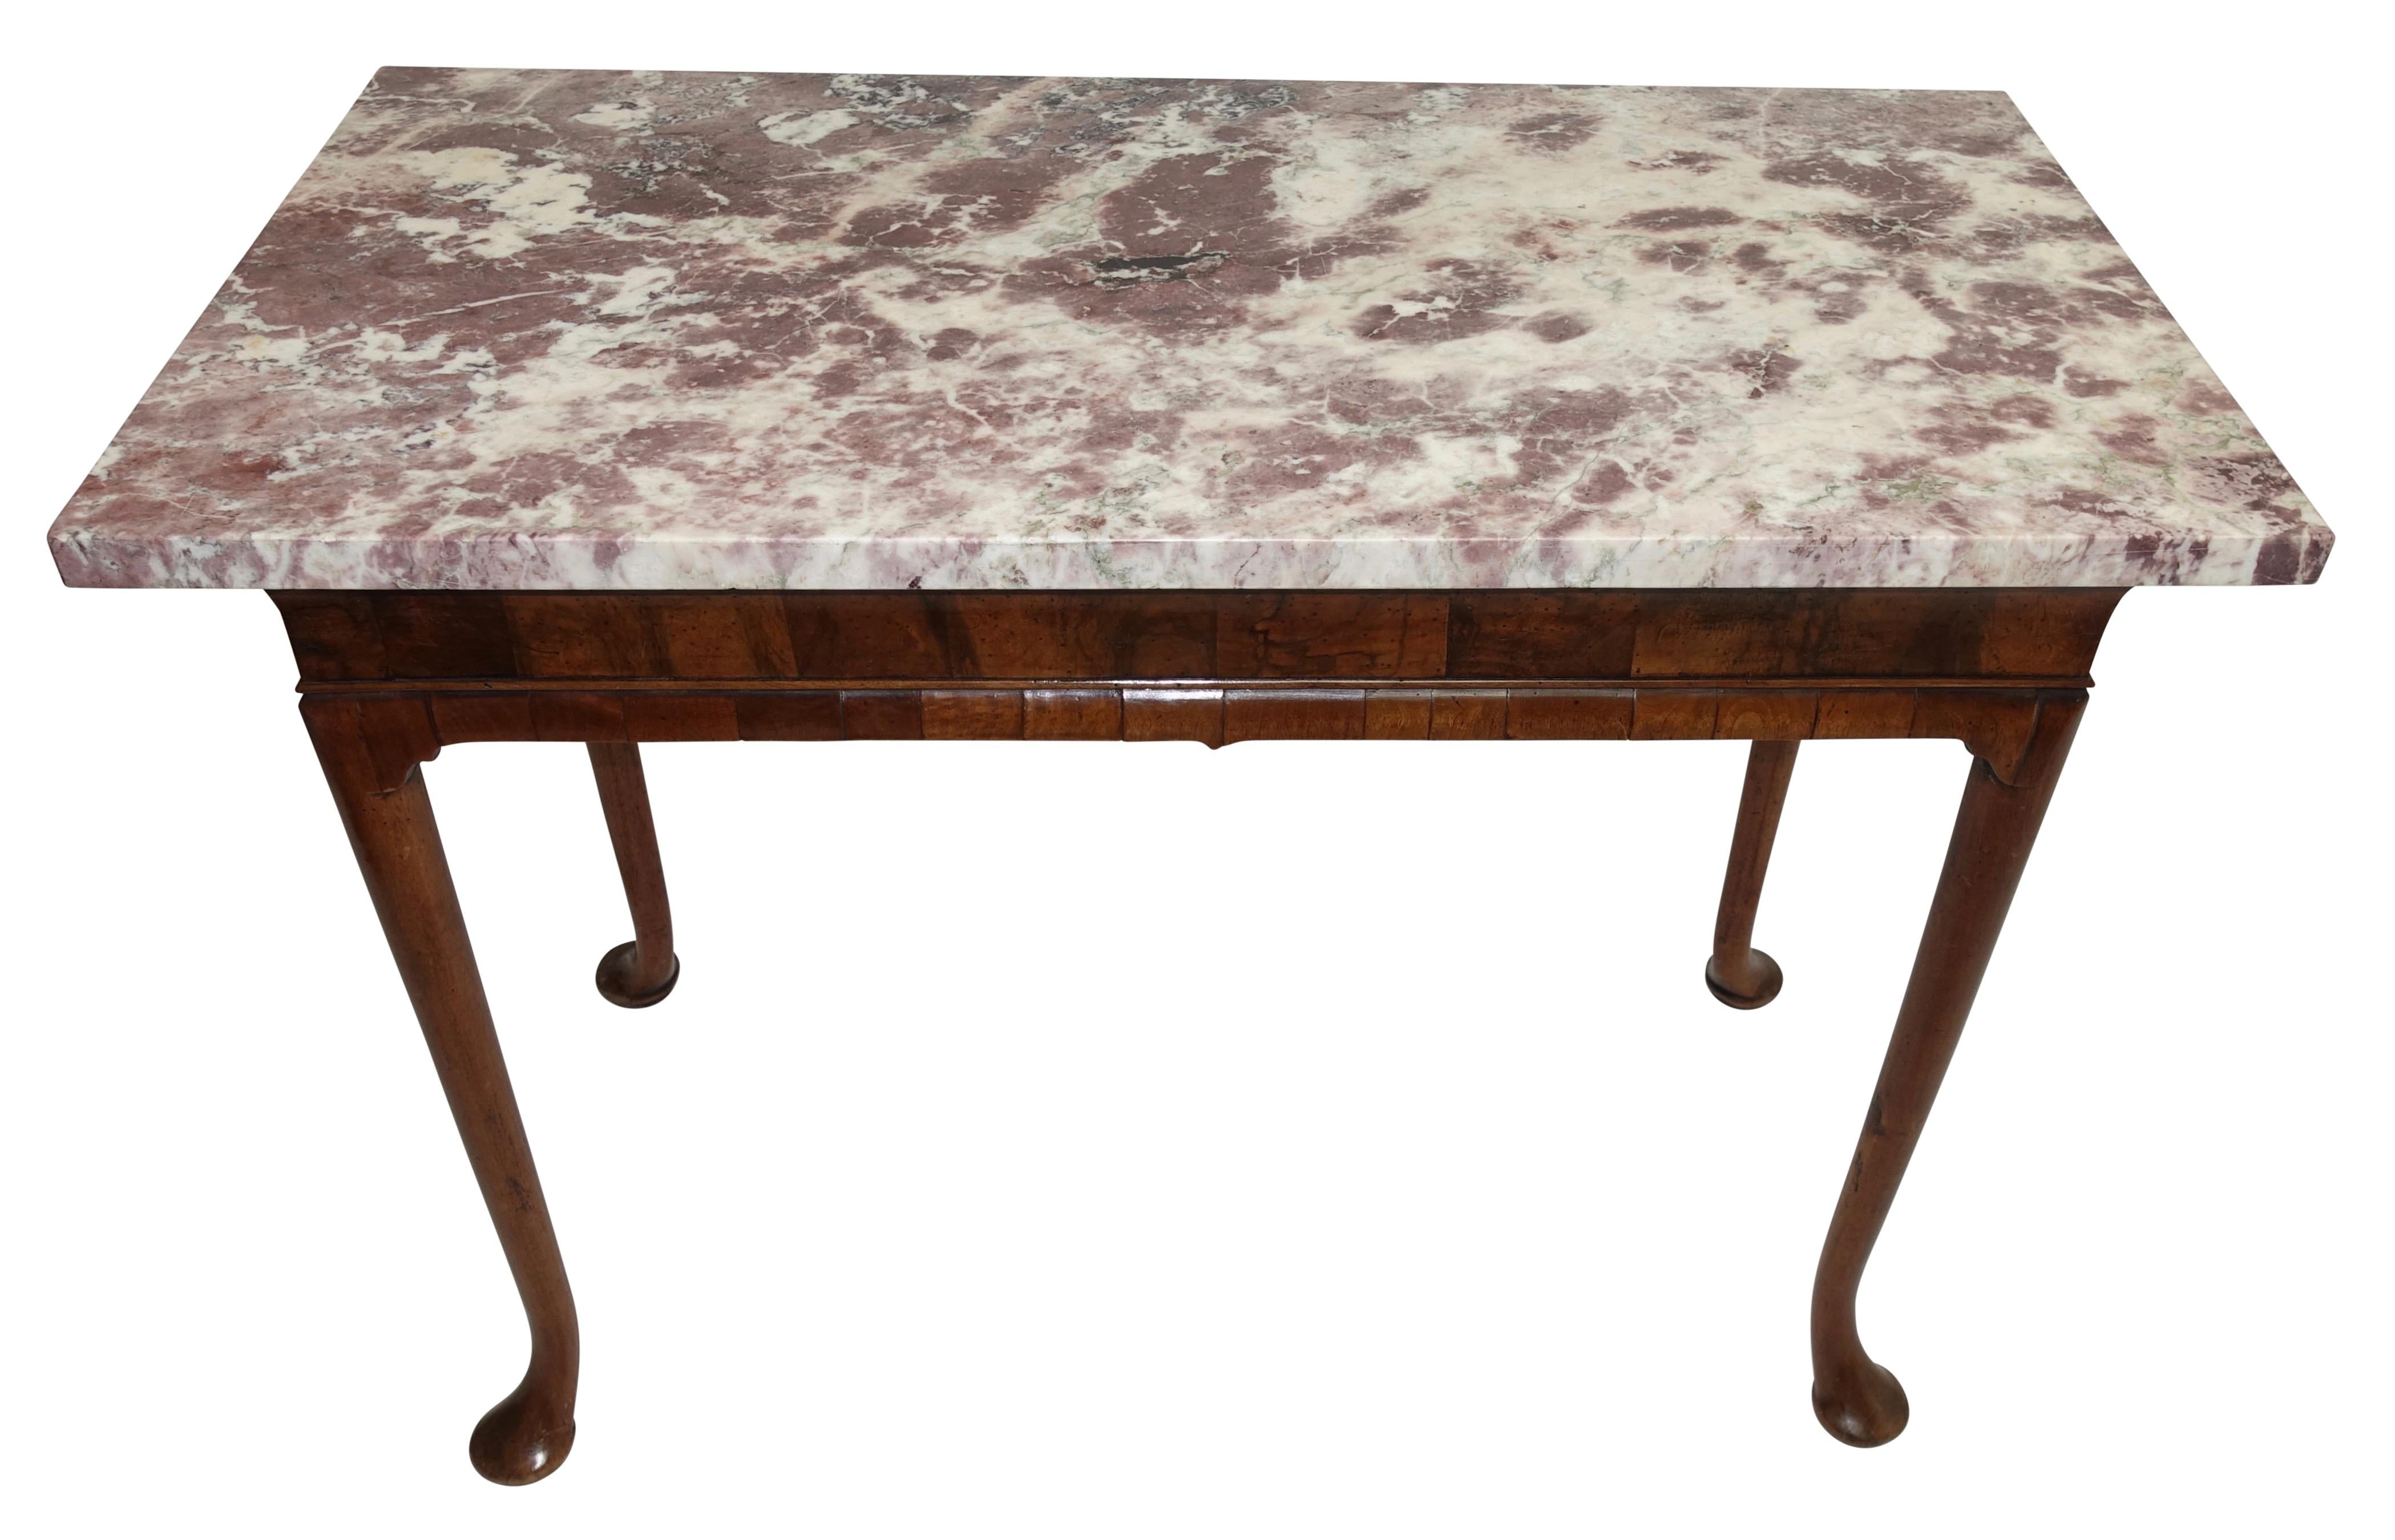 Wonderful George II period walnut pier or console table, circa 1740, with associated marble top. Beautiful and well proportioned Brescia Violeta marble top is supported by a walnut base with a cavetto modeled frieze veneered in burl walnut,